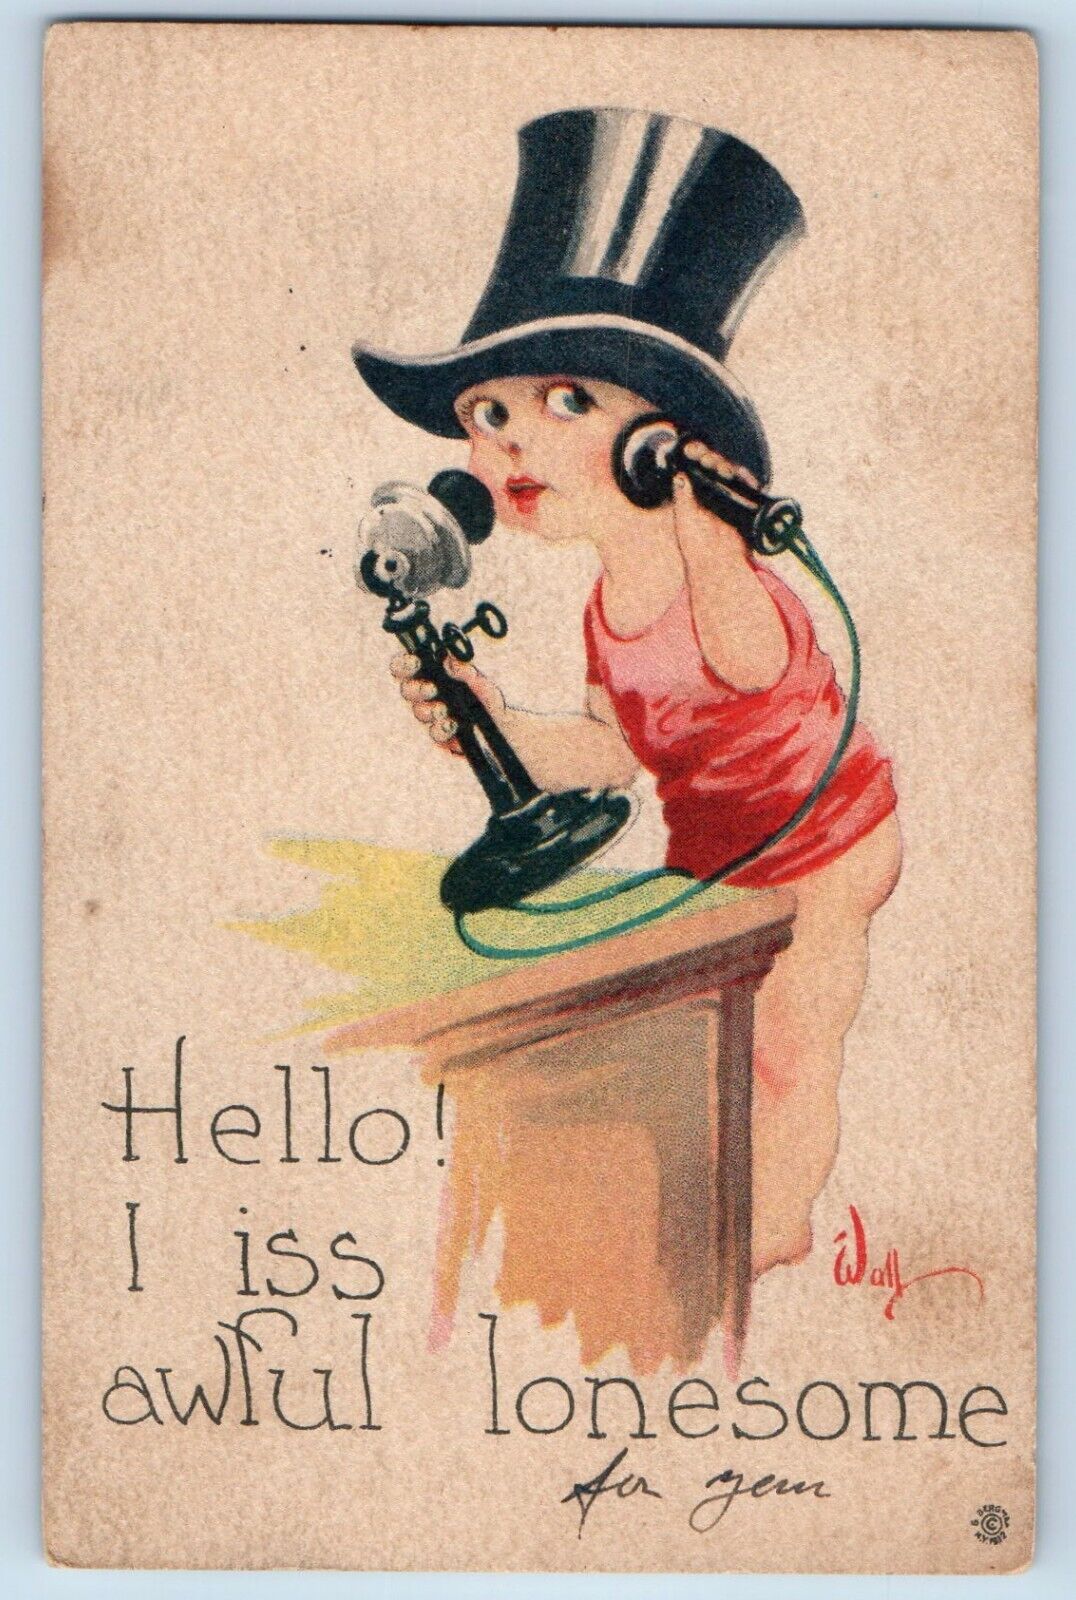 Wall Signed Artist Postcard Little Girl With Top Hat Telephone Sheboygan WI 1915